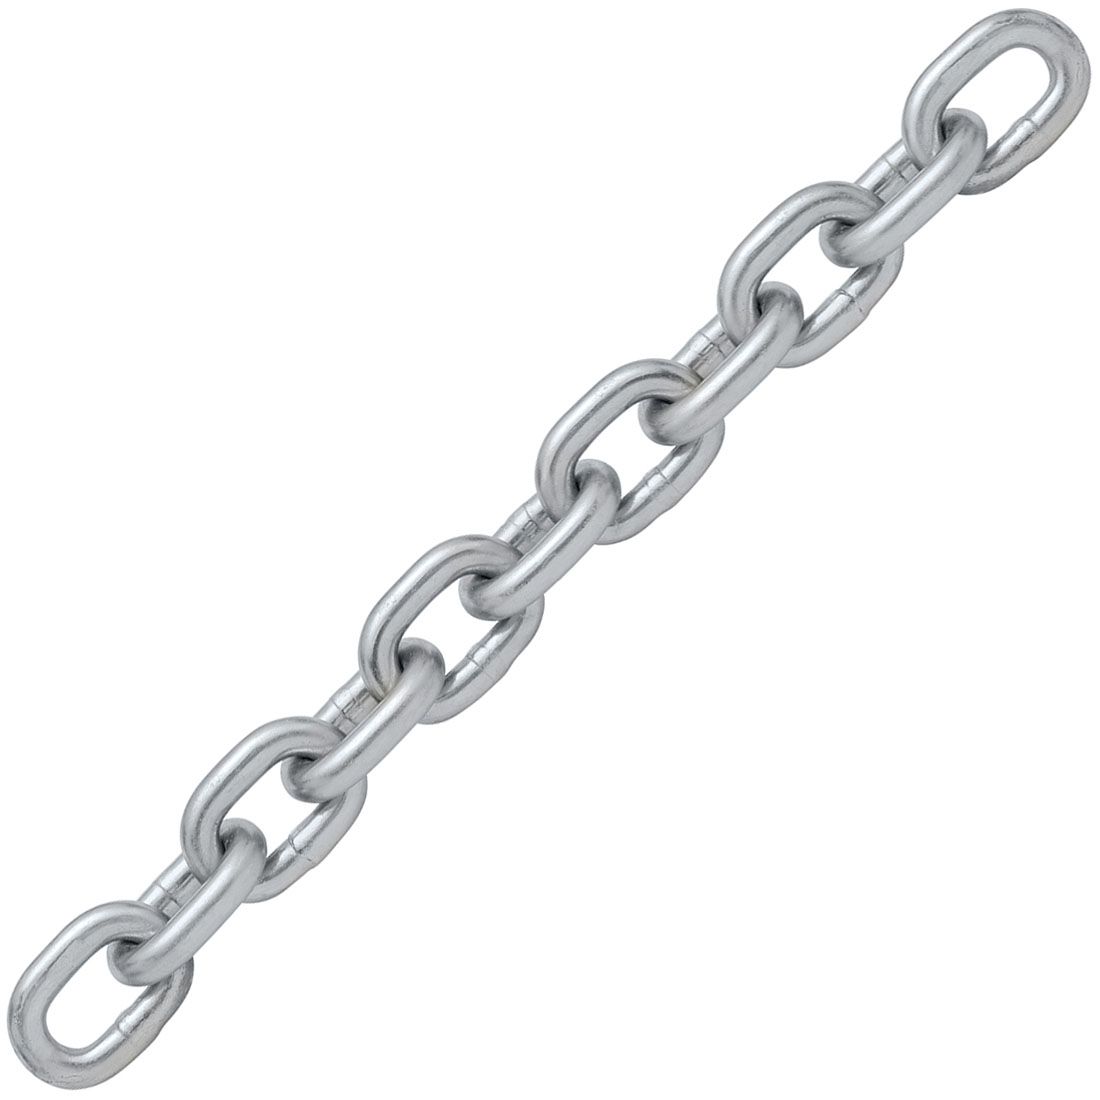 Indusco 23100241 Grade 30 Galvanized Steel Proof Coil Chain 92 Length 5/16 Trade 1900 lbs Load Capacity Zinc Plated 